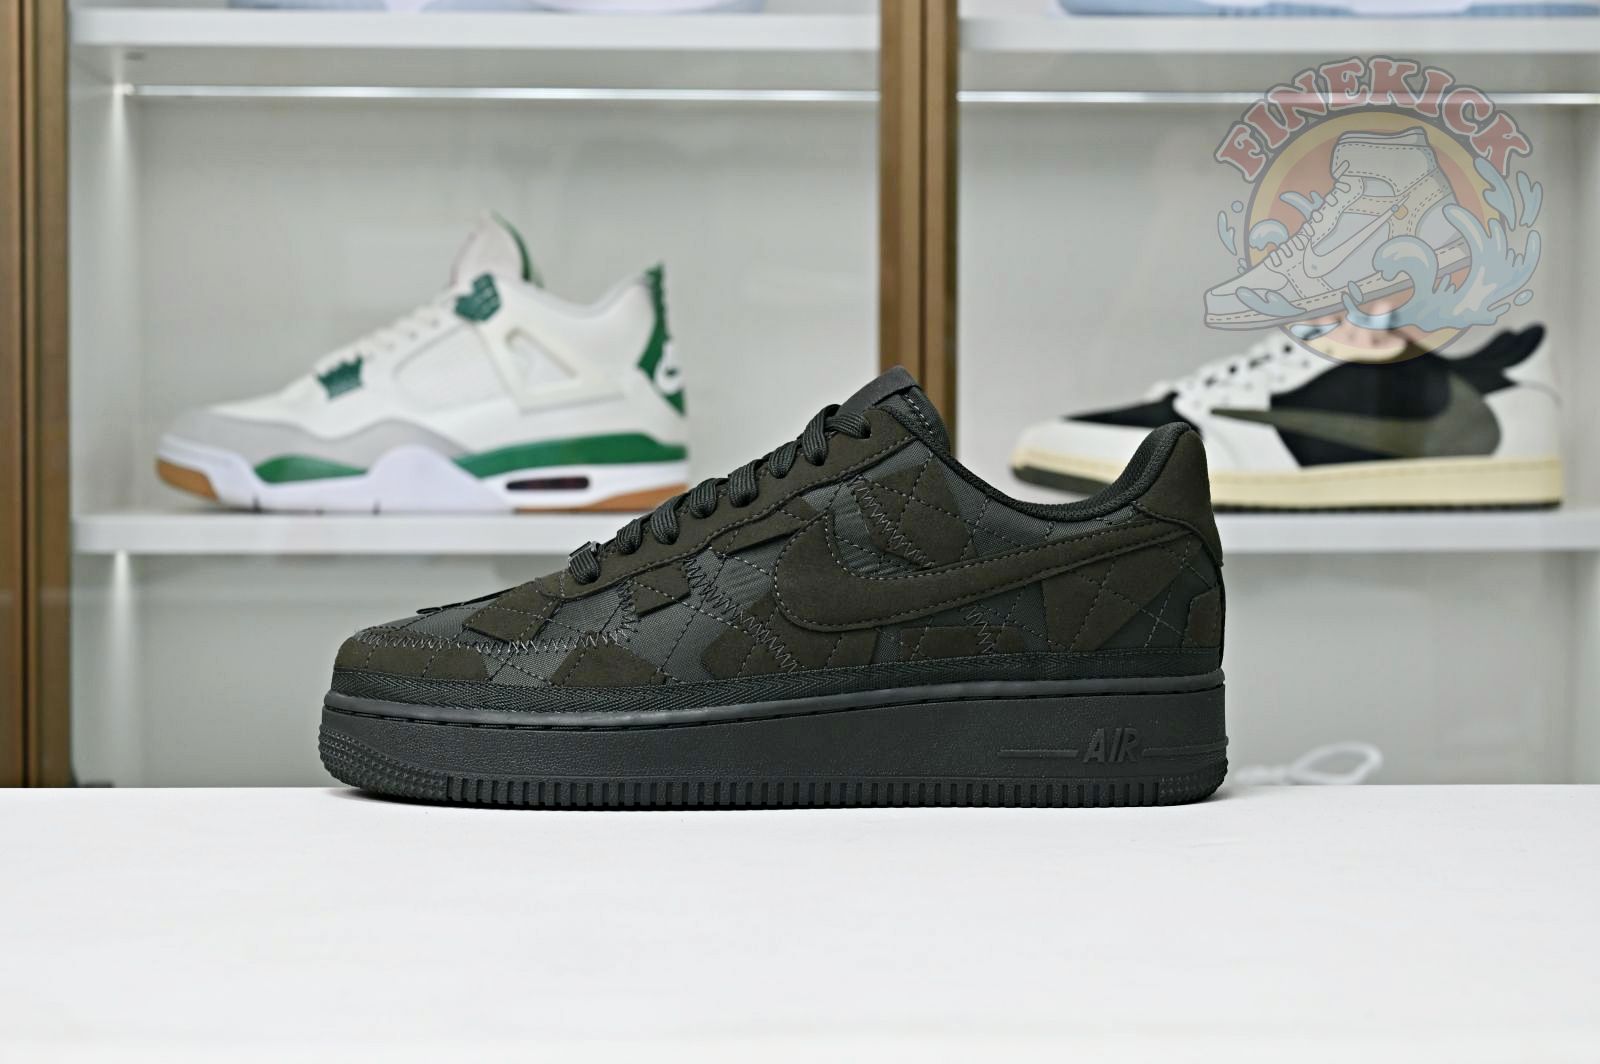 Nike Air Force 1 Low sequoia